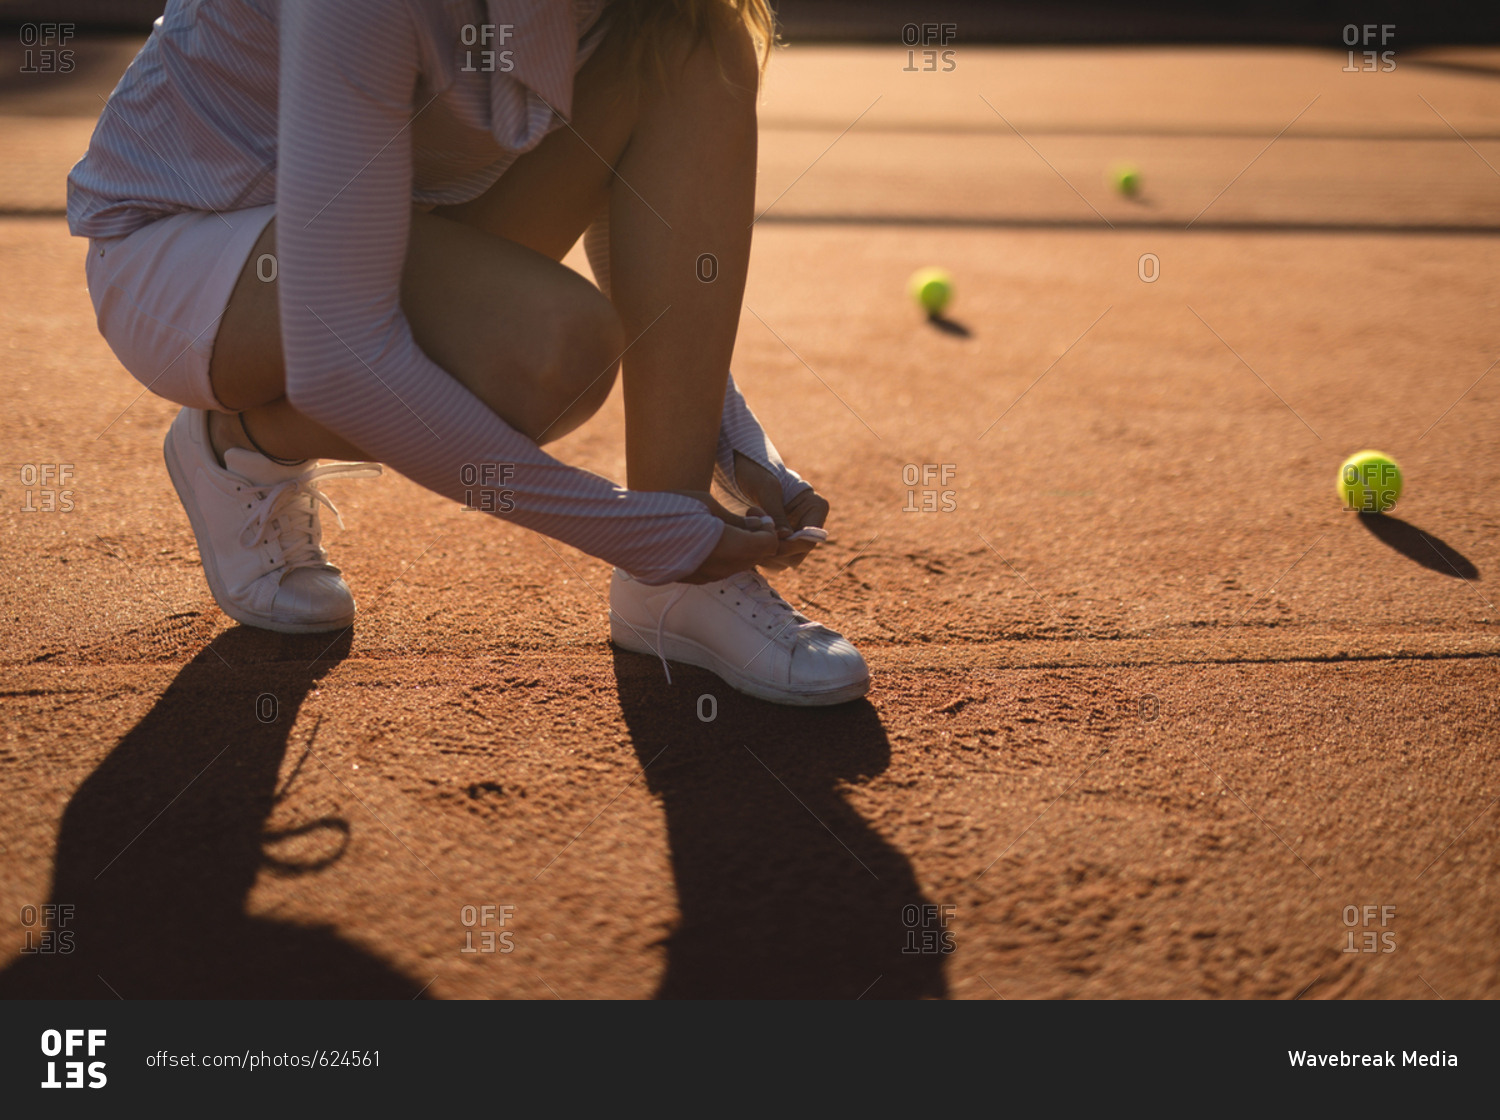 Tennis player tying shoelace in ground on a sunny day